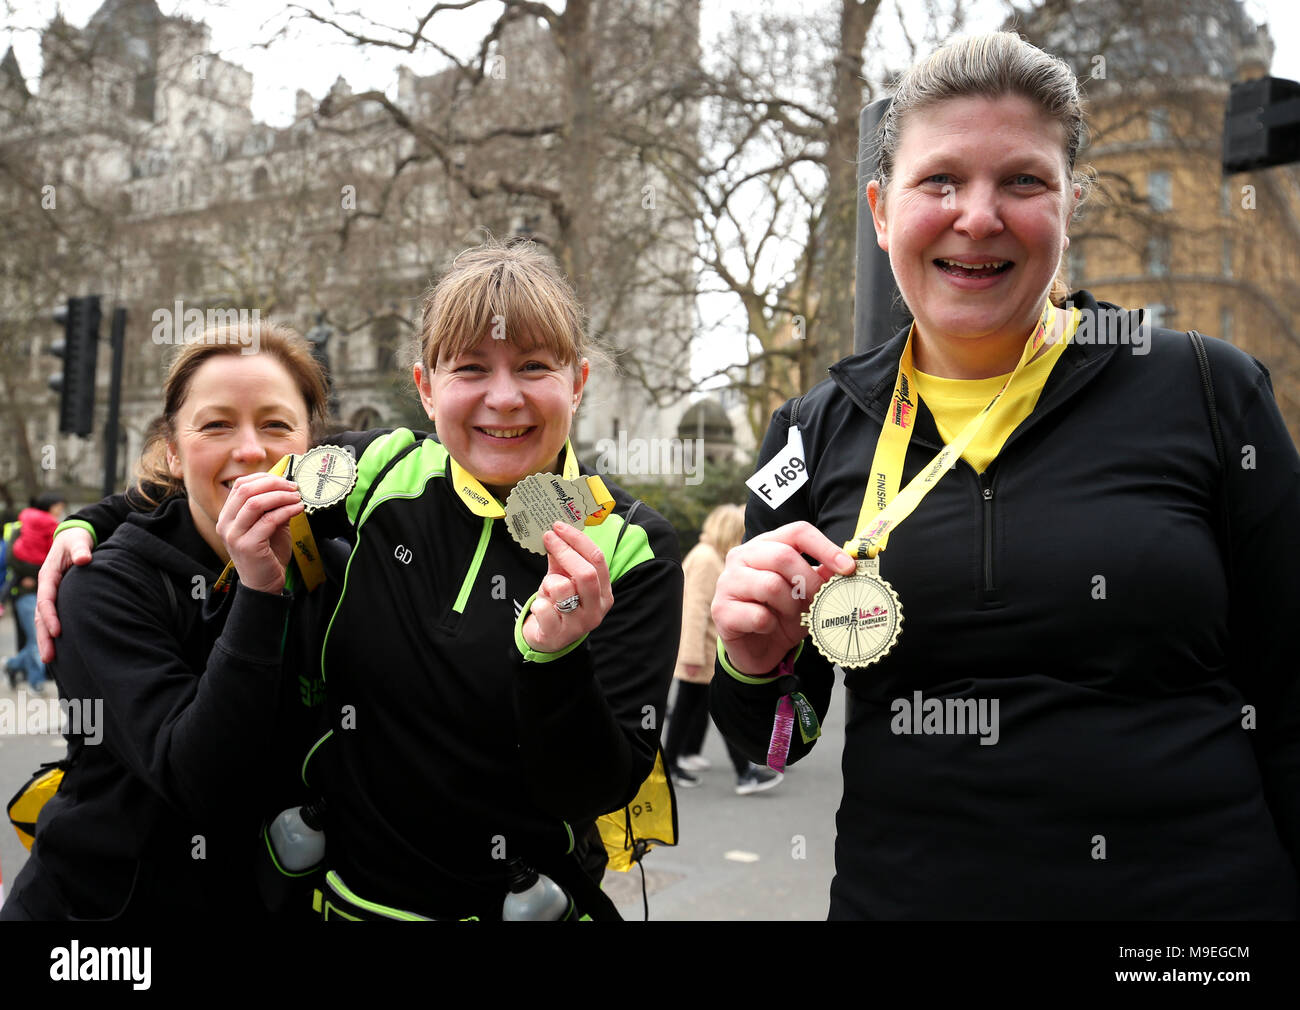 Runners pose with their medals after completing the 2018 London Landmarks Half Marathon. PRESS ASSOCIATION Photo. Picture date: Sunday March 25, 2018. Photo credit should read: Steven Paston/PA Wire Stock Photo